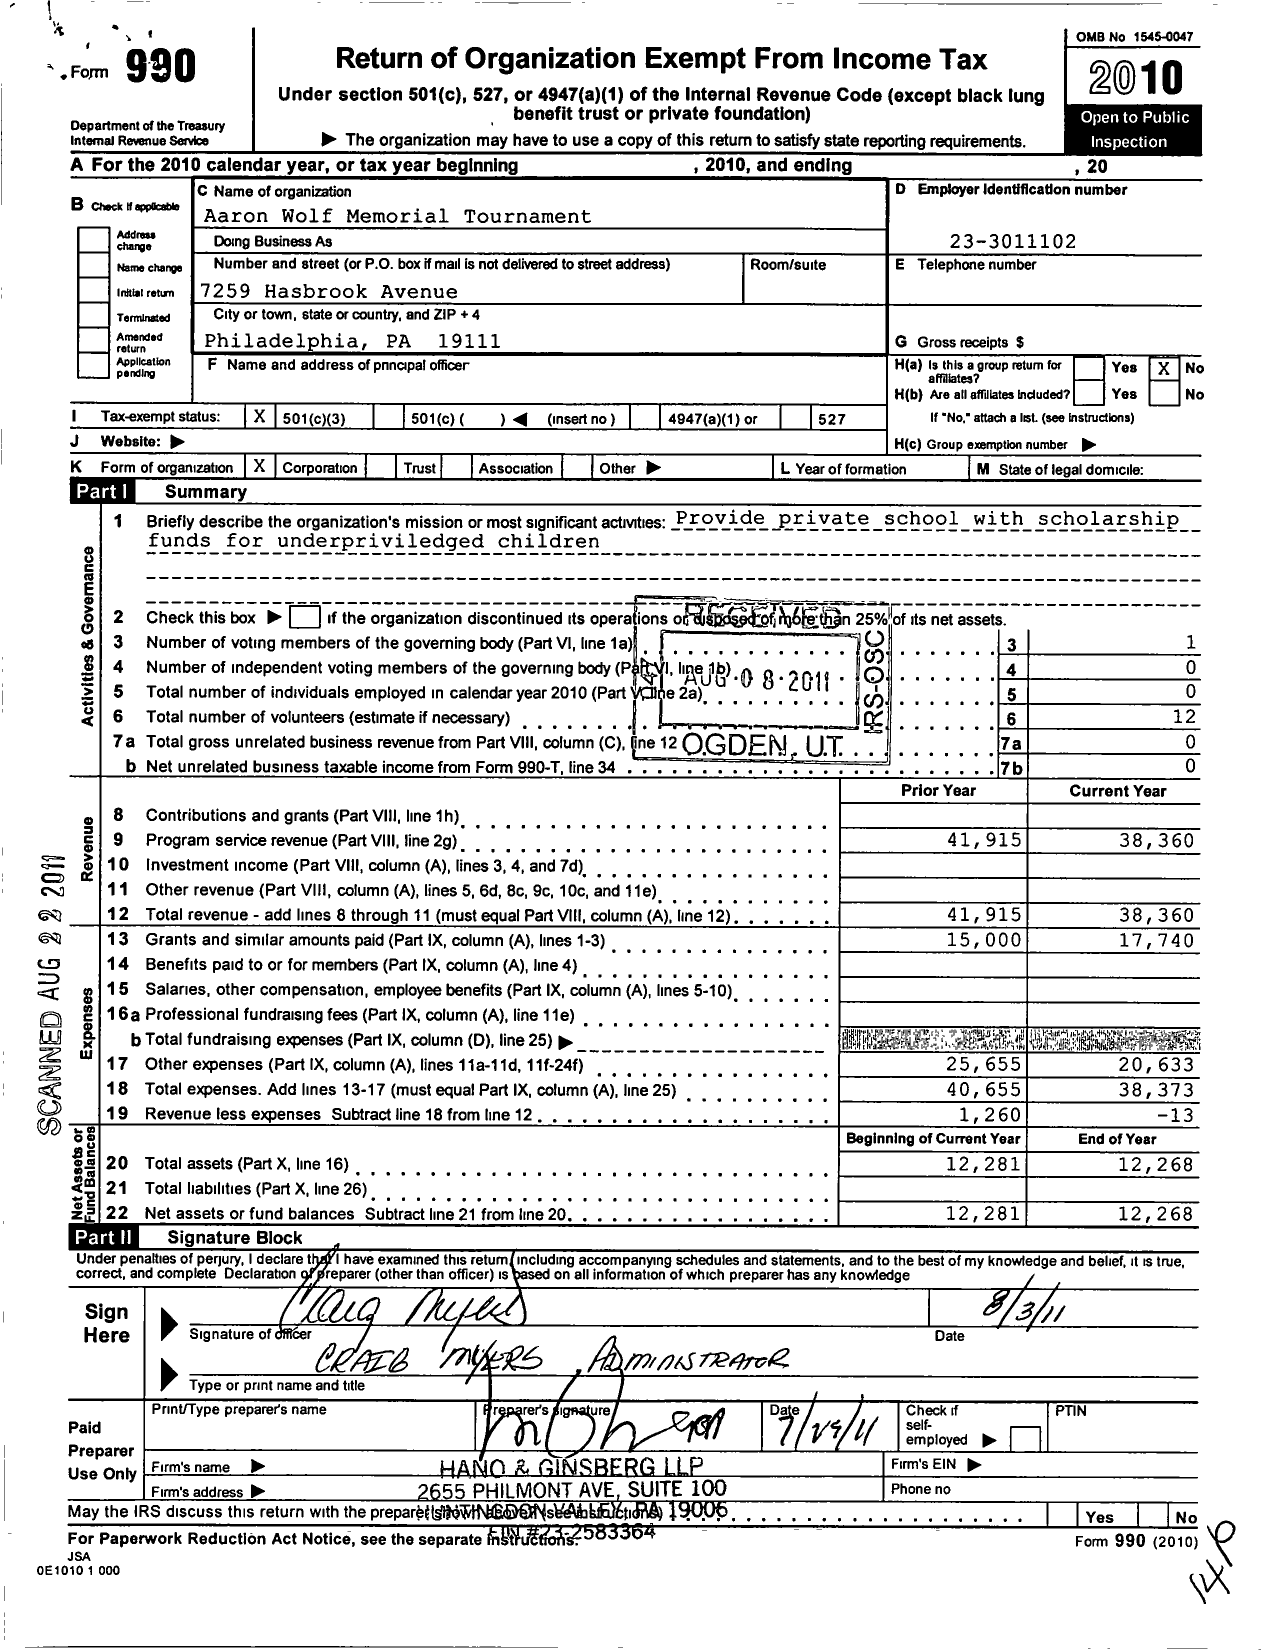 Image of first page of 2010 Form 990 for Aaron Wolf Memorial Tournament